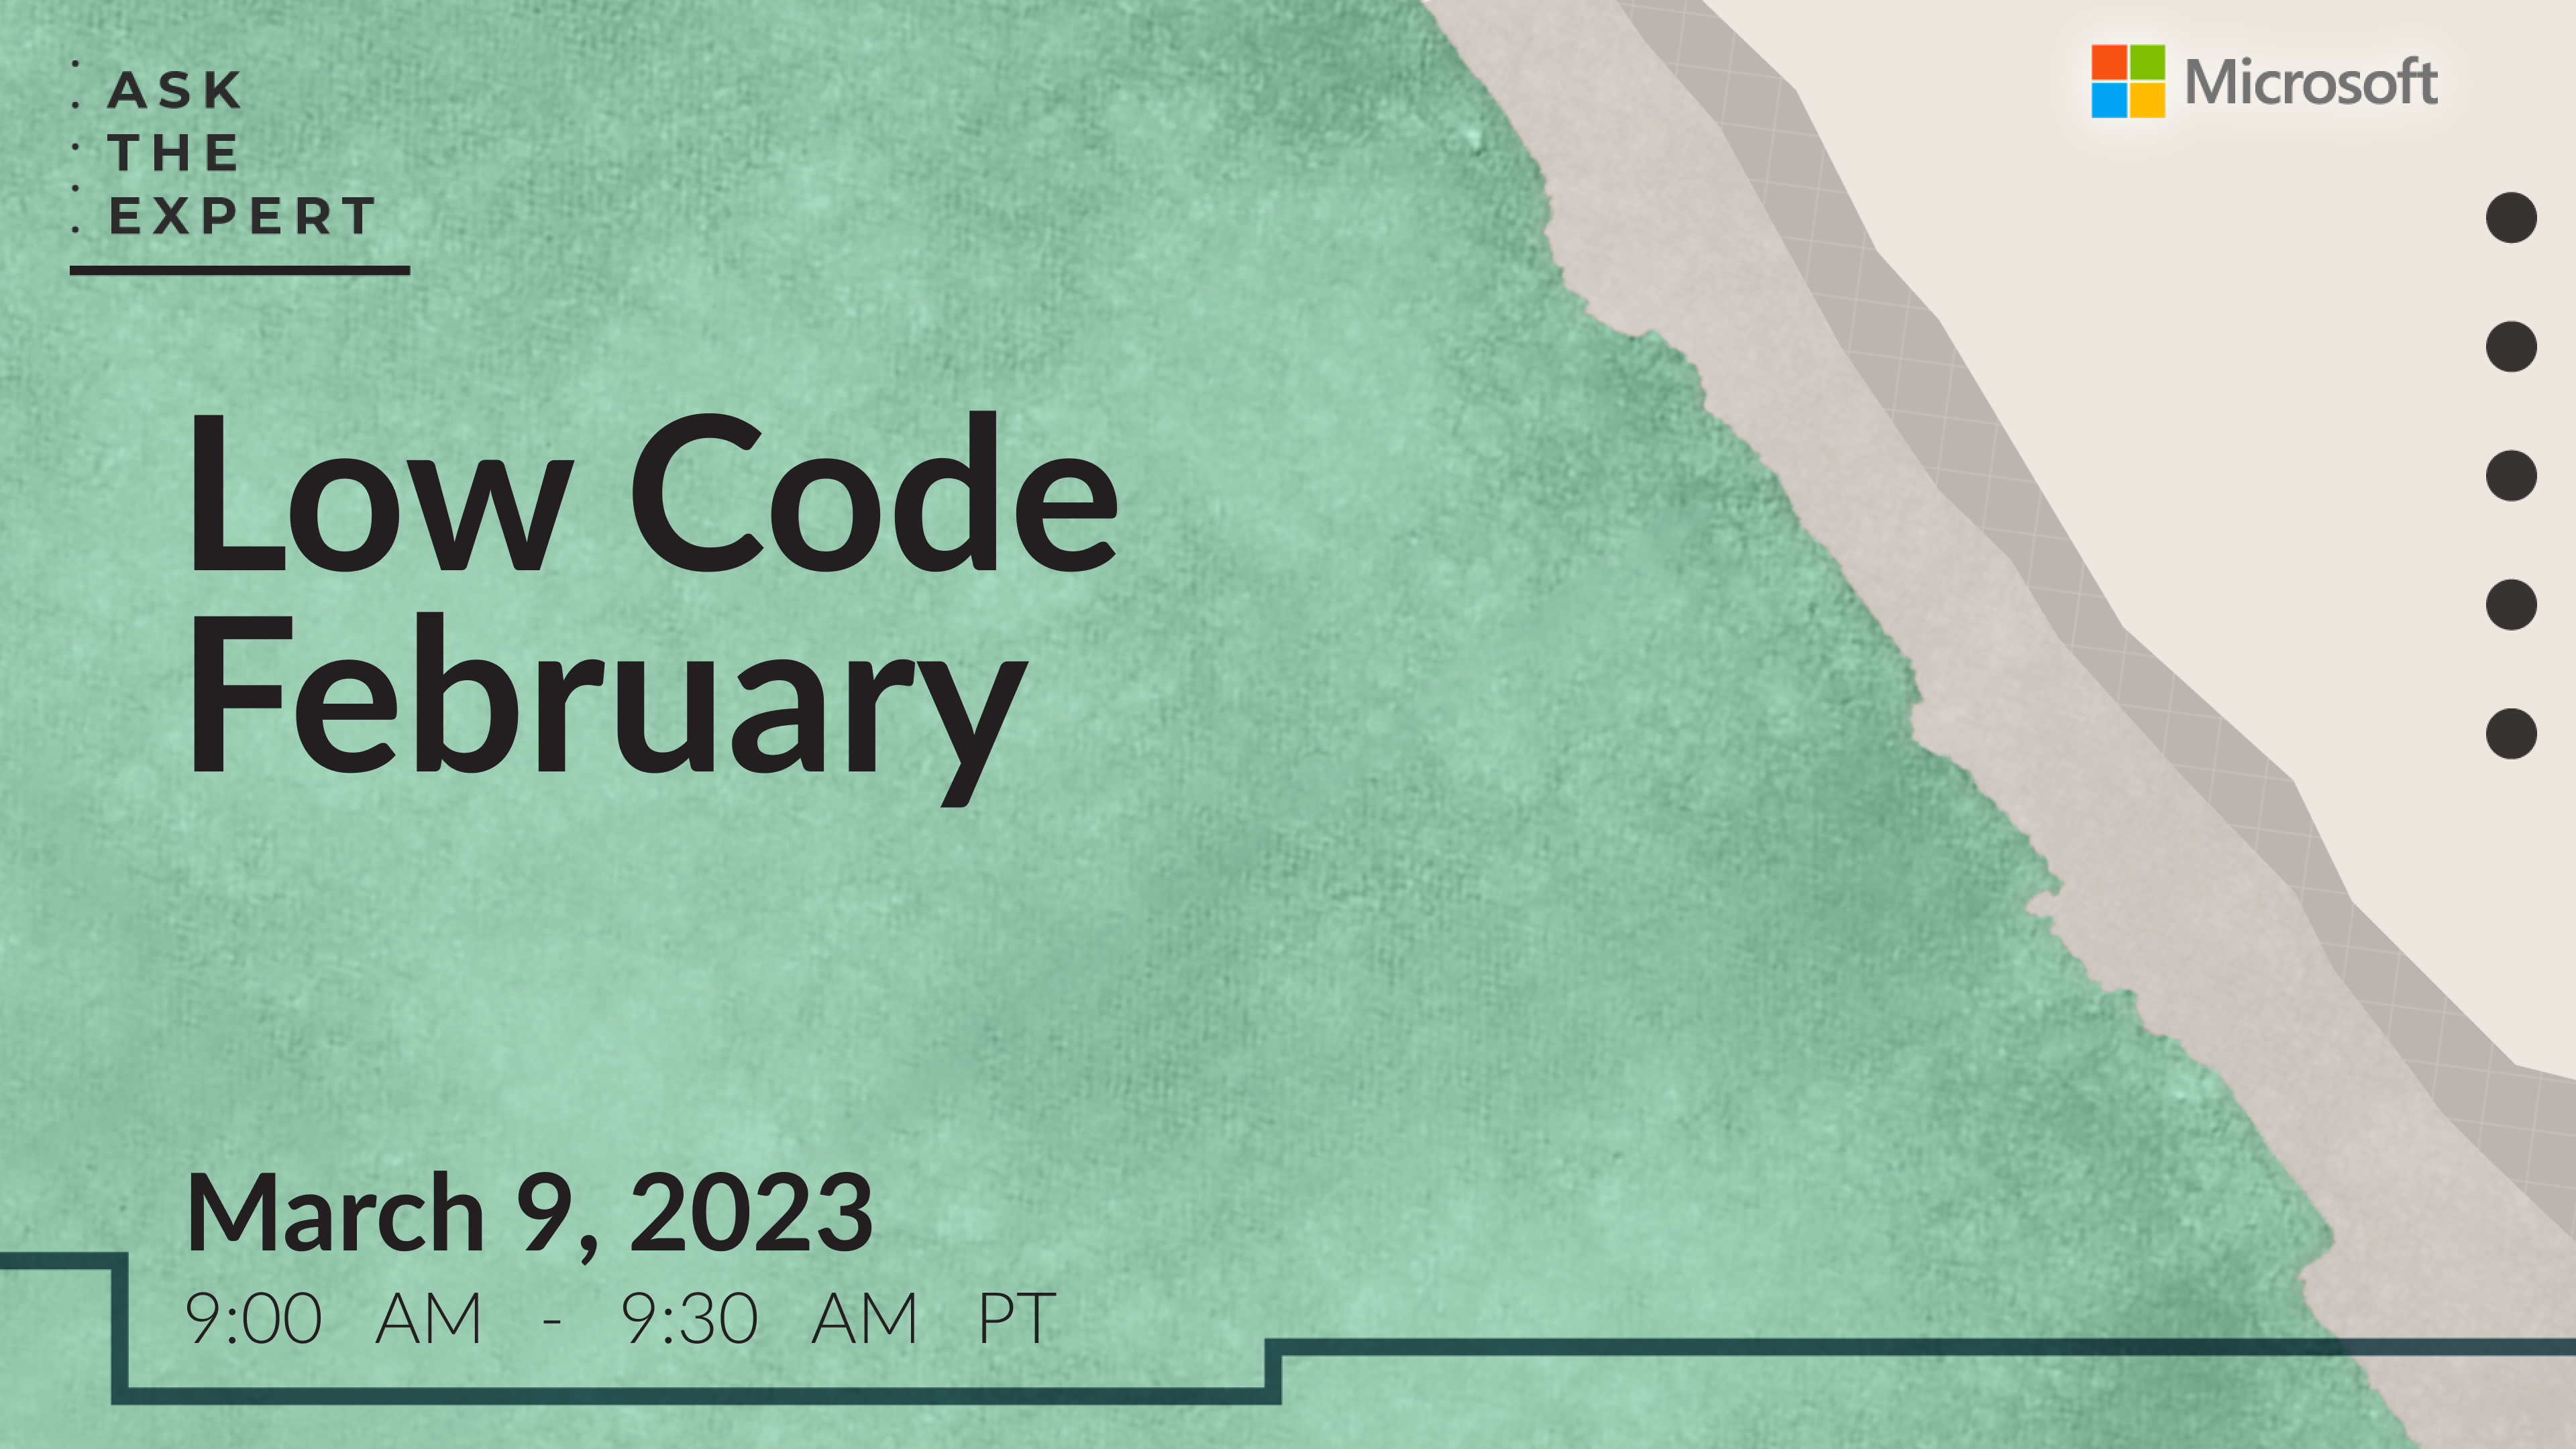 Banner for Low Code February Ask the Expert session